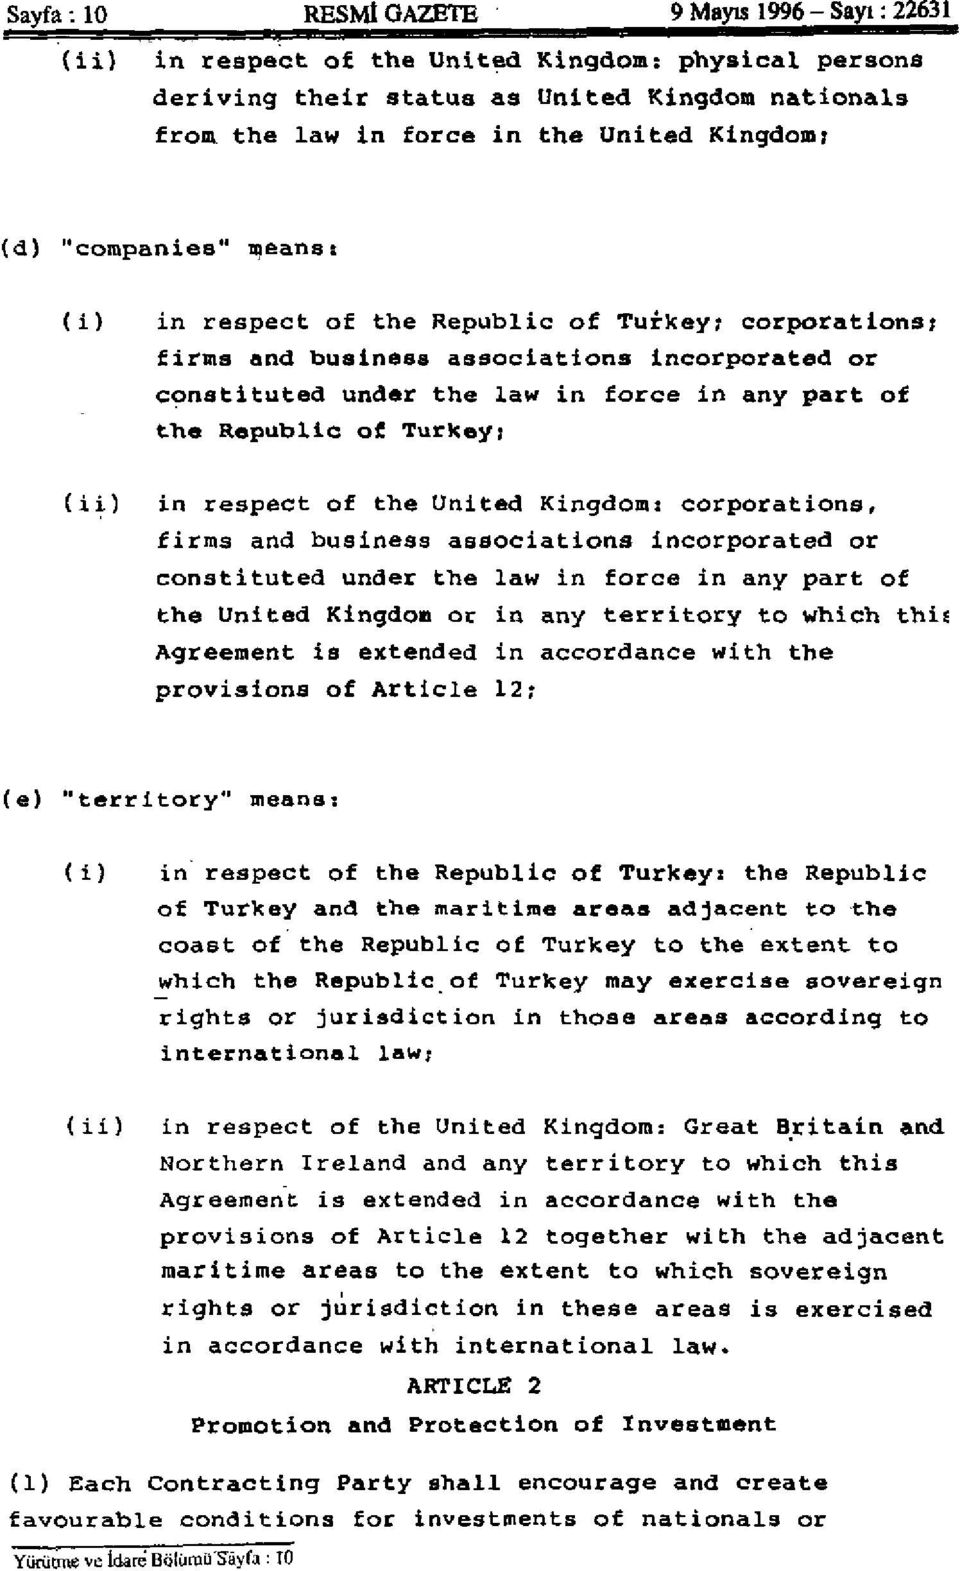 of Turkey; (ii) in respect of the United Kingdom: corporations, firms and business associations incorporated or constituted under the law in force in any part of the United Kingdom or in any